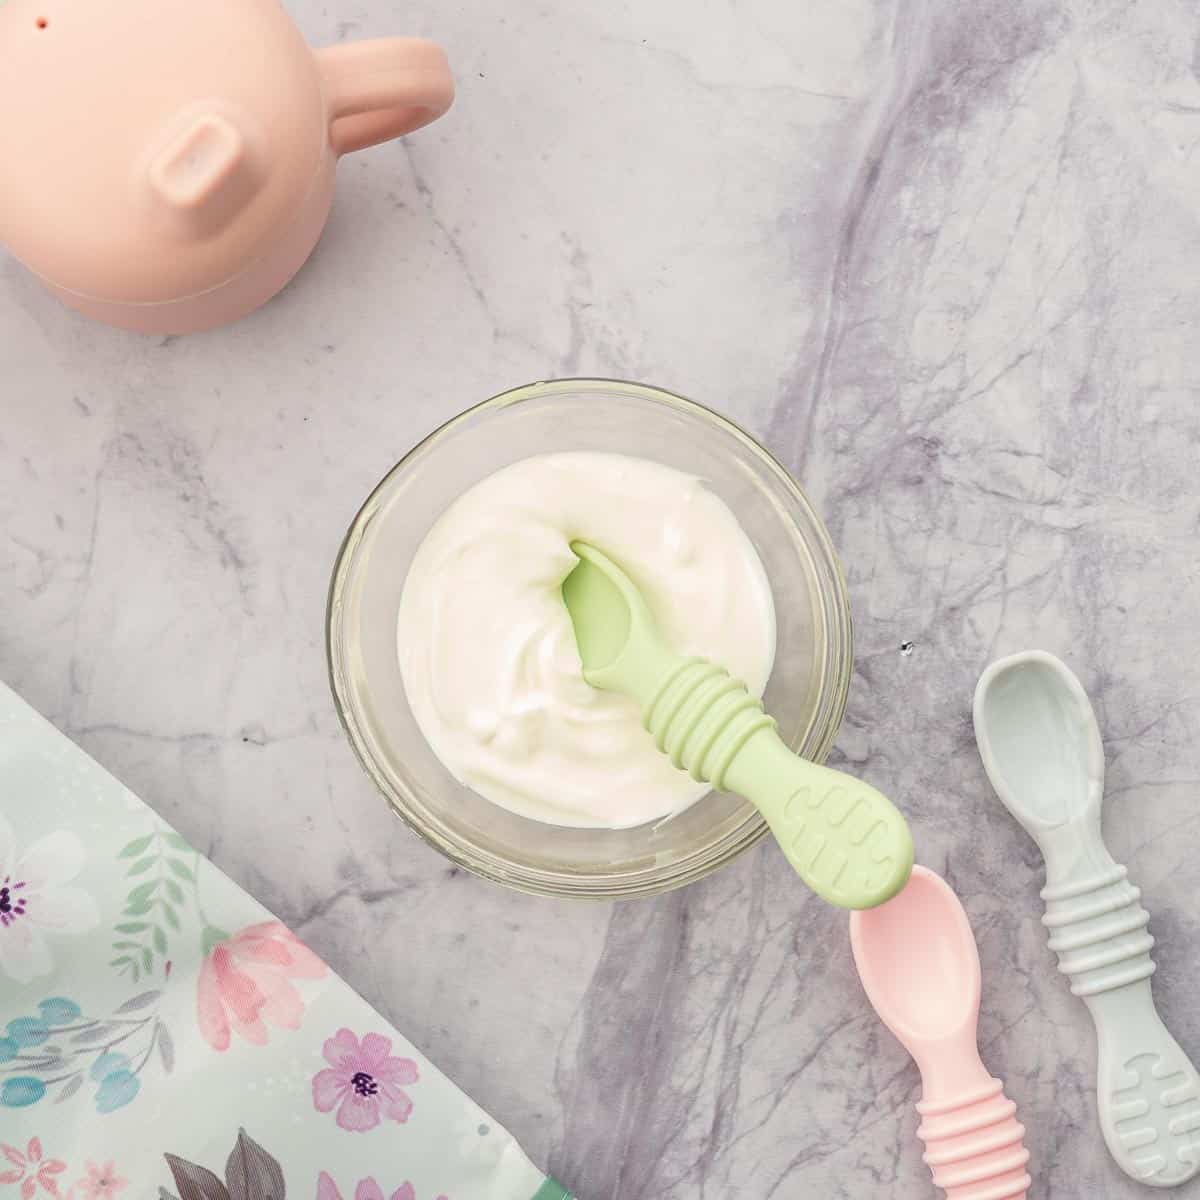 A small bowl of plain yogurt with a baby spoon next to a sippy cup.